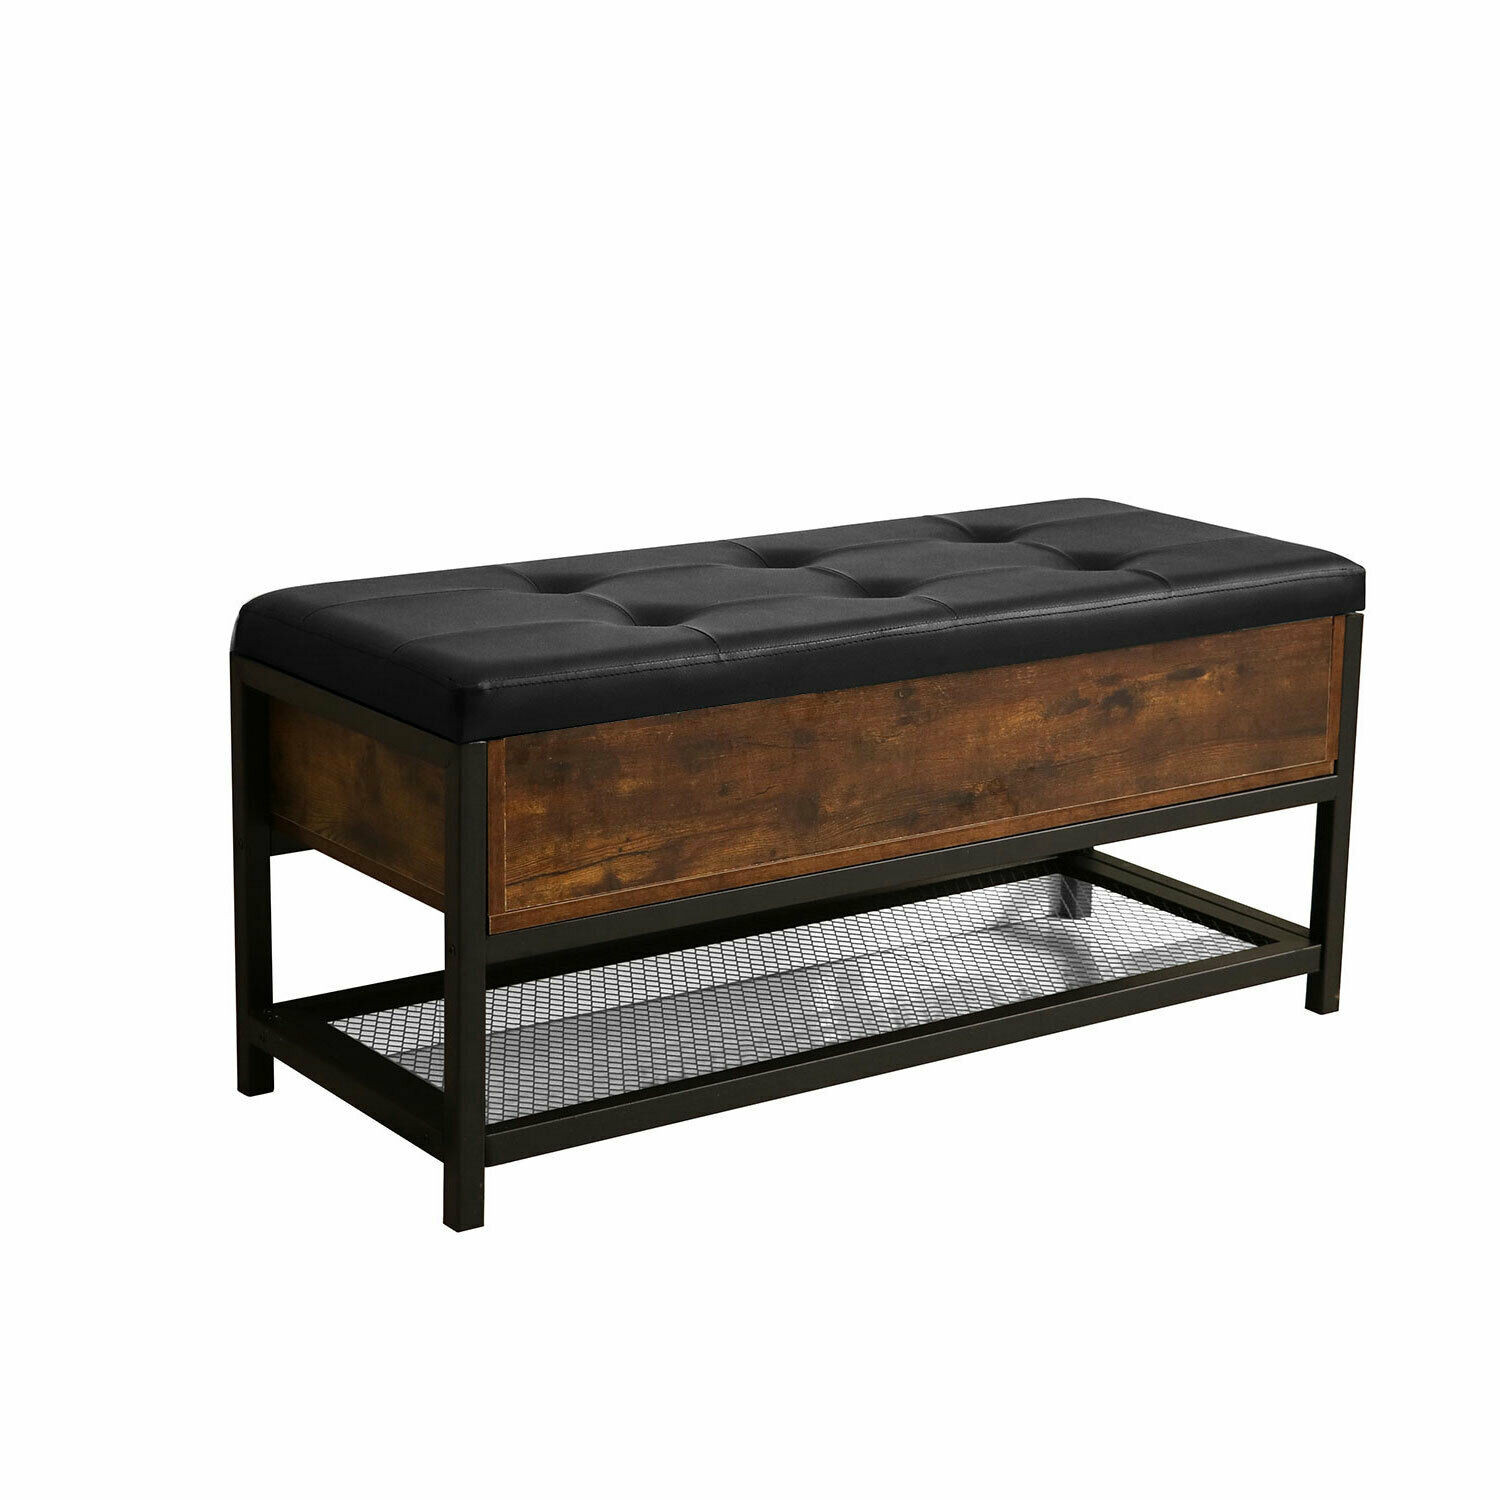 Bedroom Bench With Shoe Storage
 Shoe Storage Bench Ottoman Hallway Bedroom Two Seater